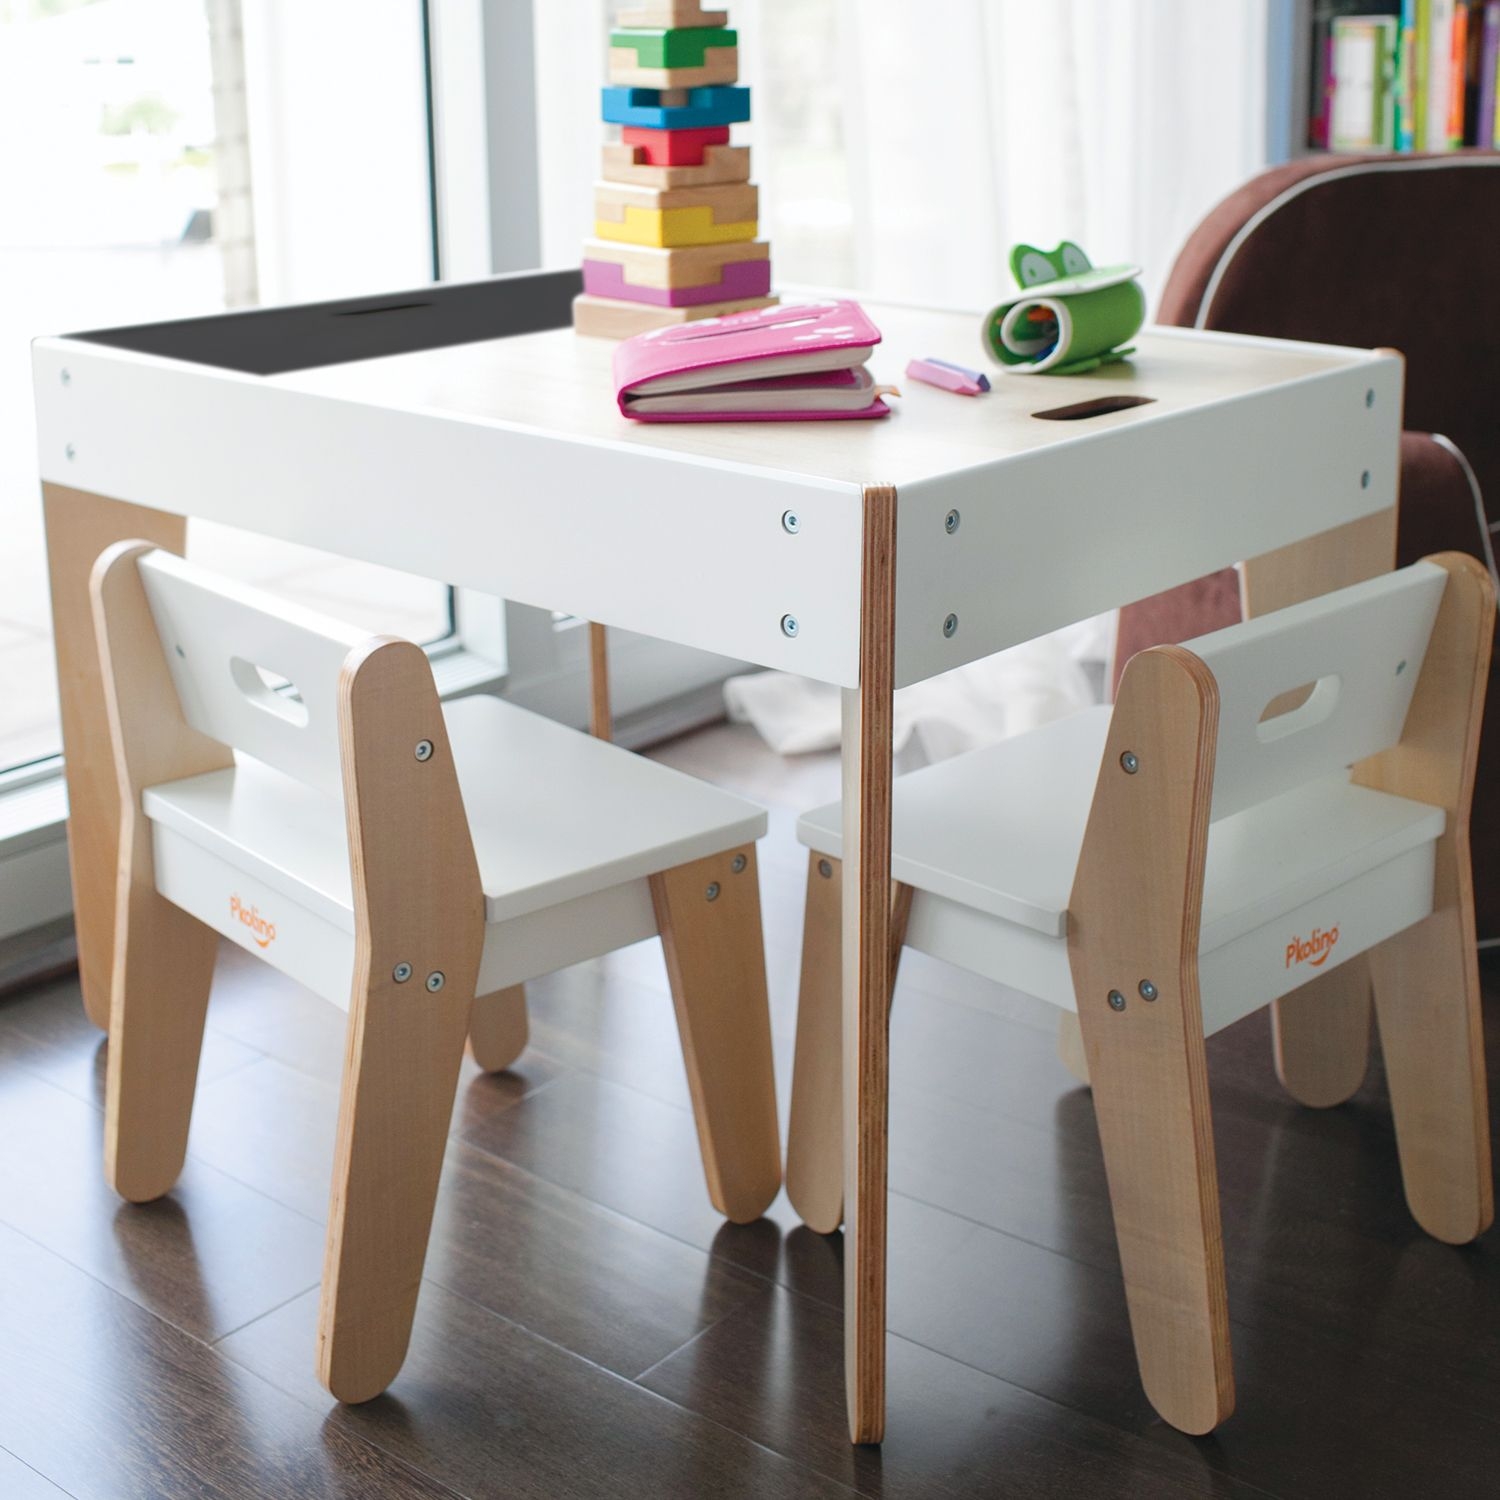 best childrens table and chair set